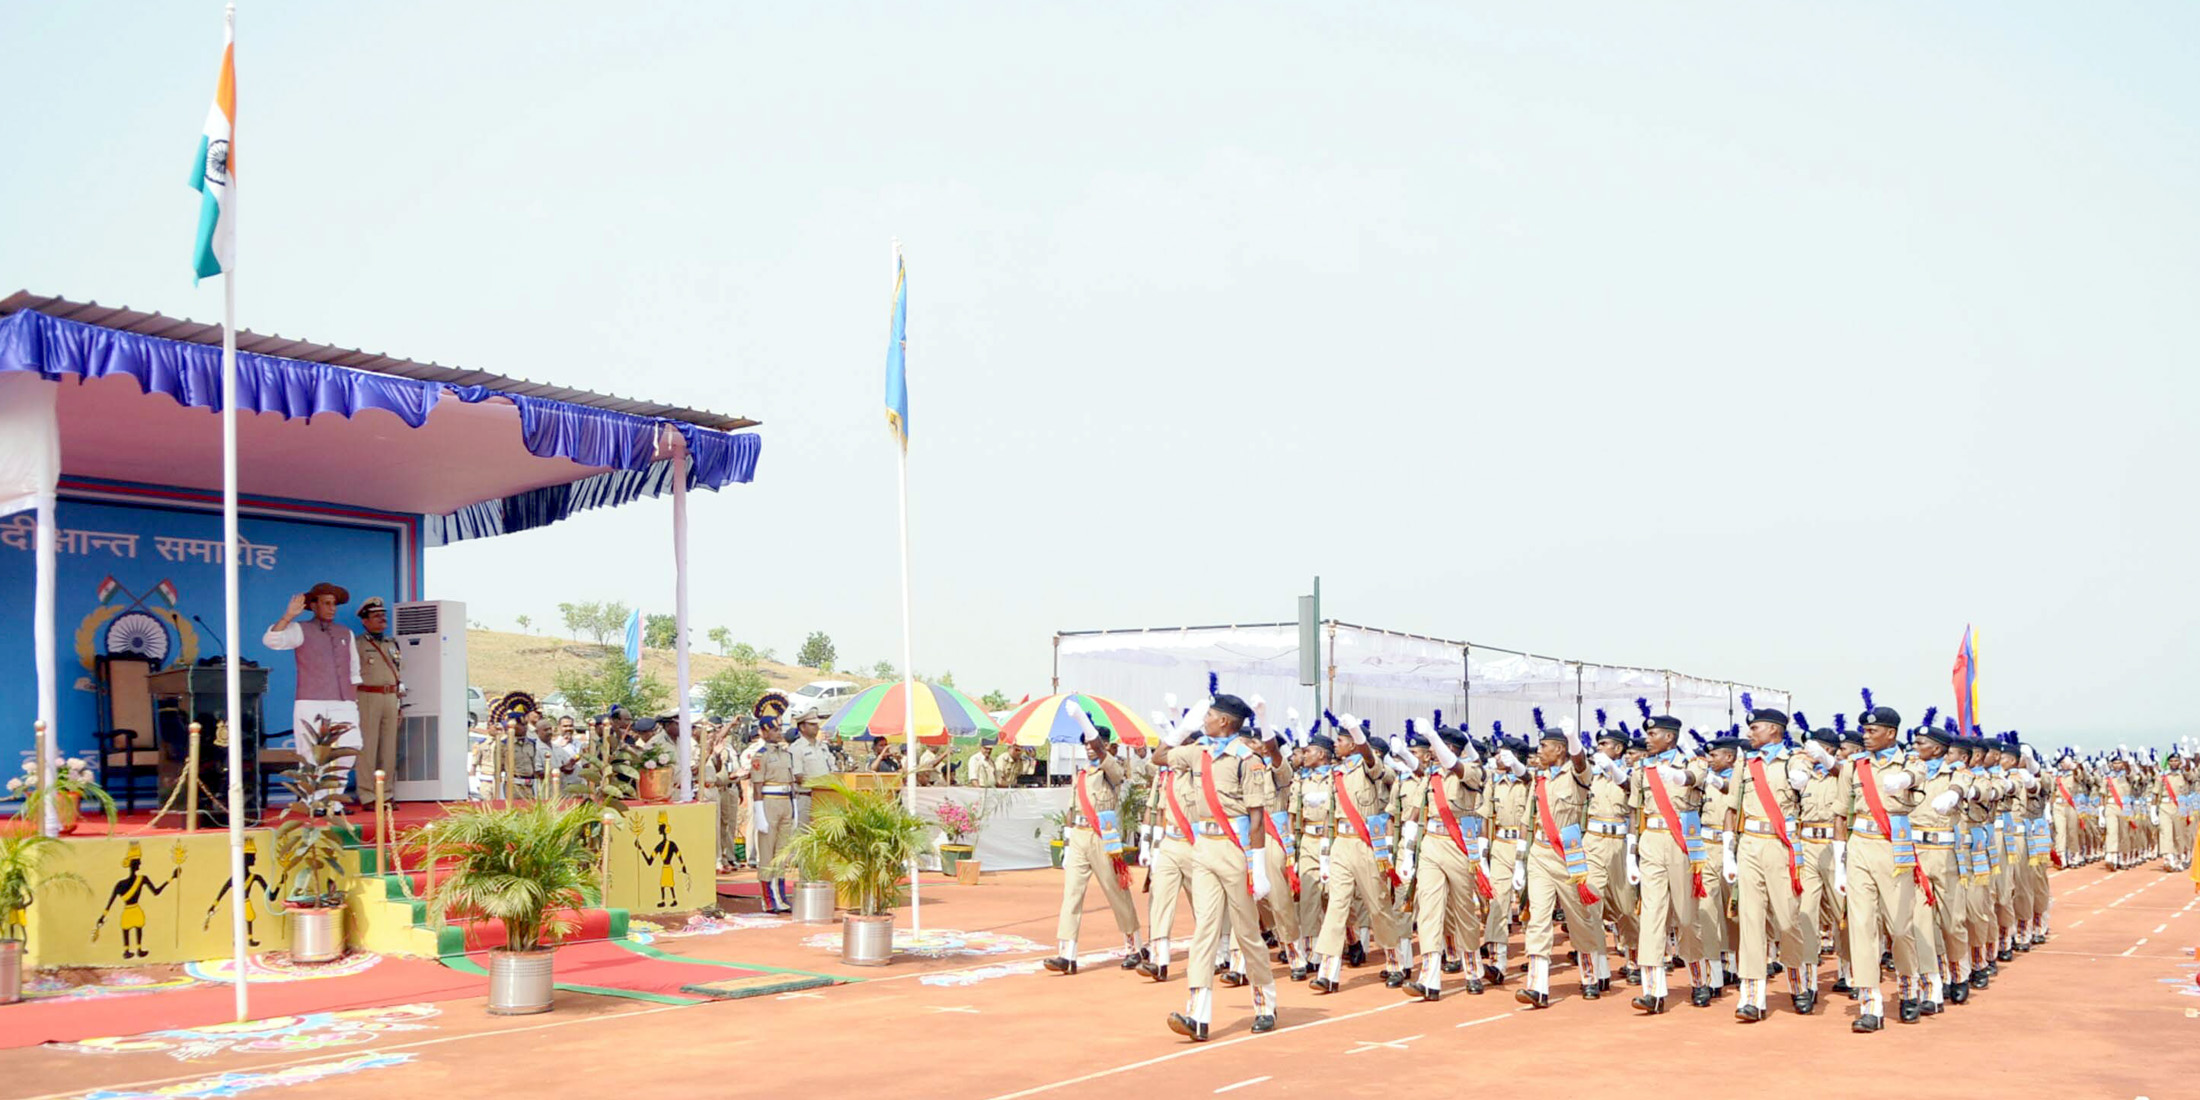 The Union Home Minister, Shri Rajnath Singh taking salute at the Passing Out Parade of the Bastariya Battalion of CRPF, in Ambikapur, in Chhattisgarh on May 21, 2018.